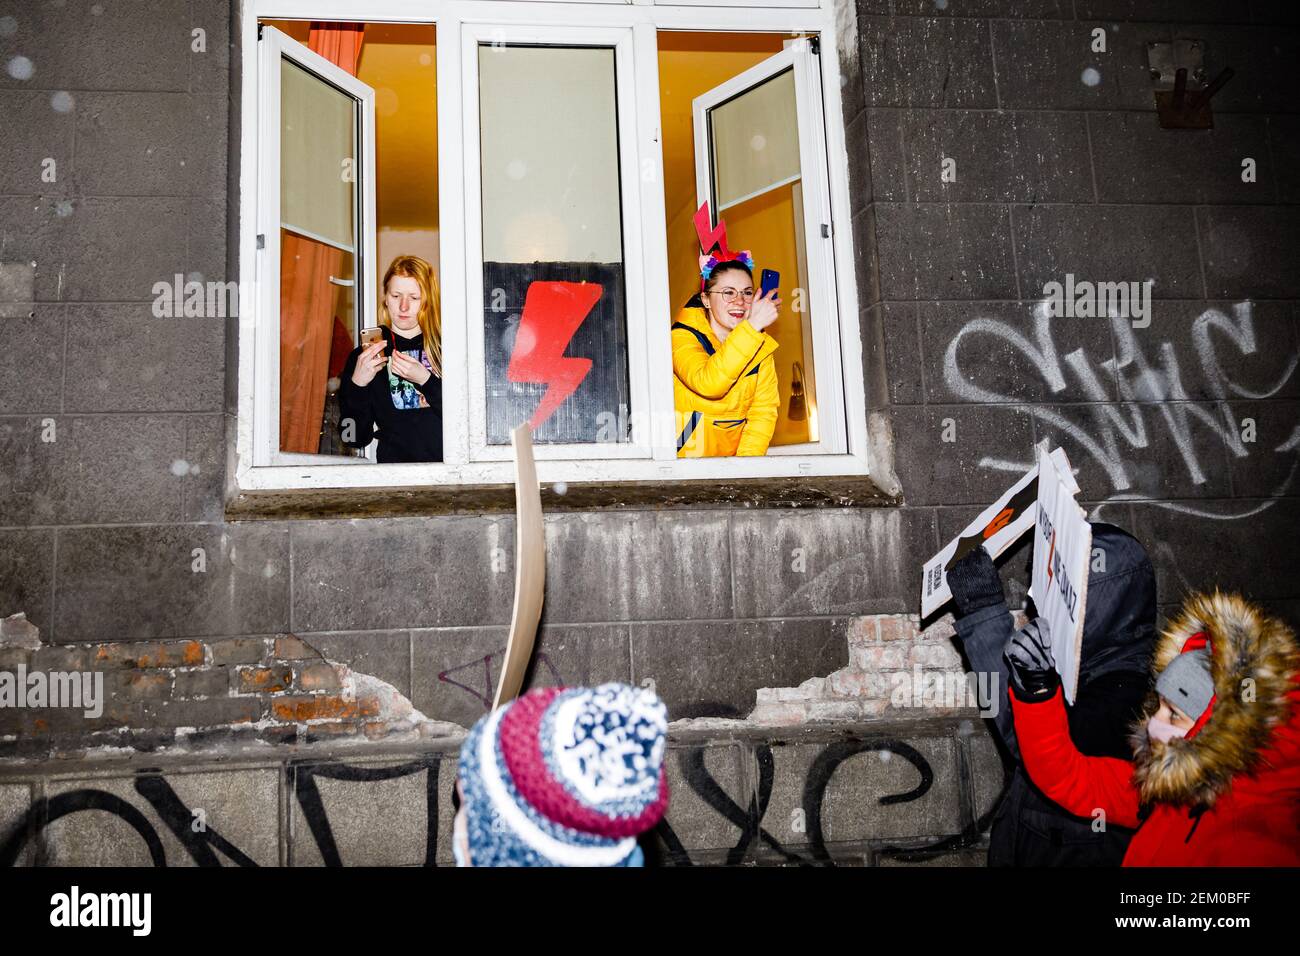 Two young women are seen with smarphones taking photos of the protesters through the opened windows of their flat. A red lighting, the symbol of Women Stock Photo